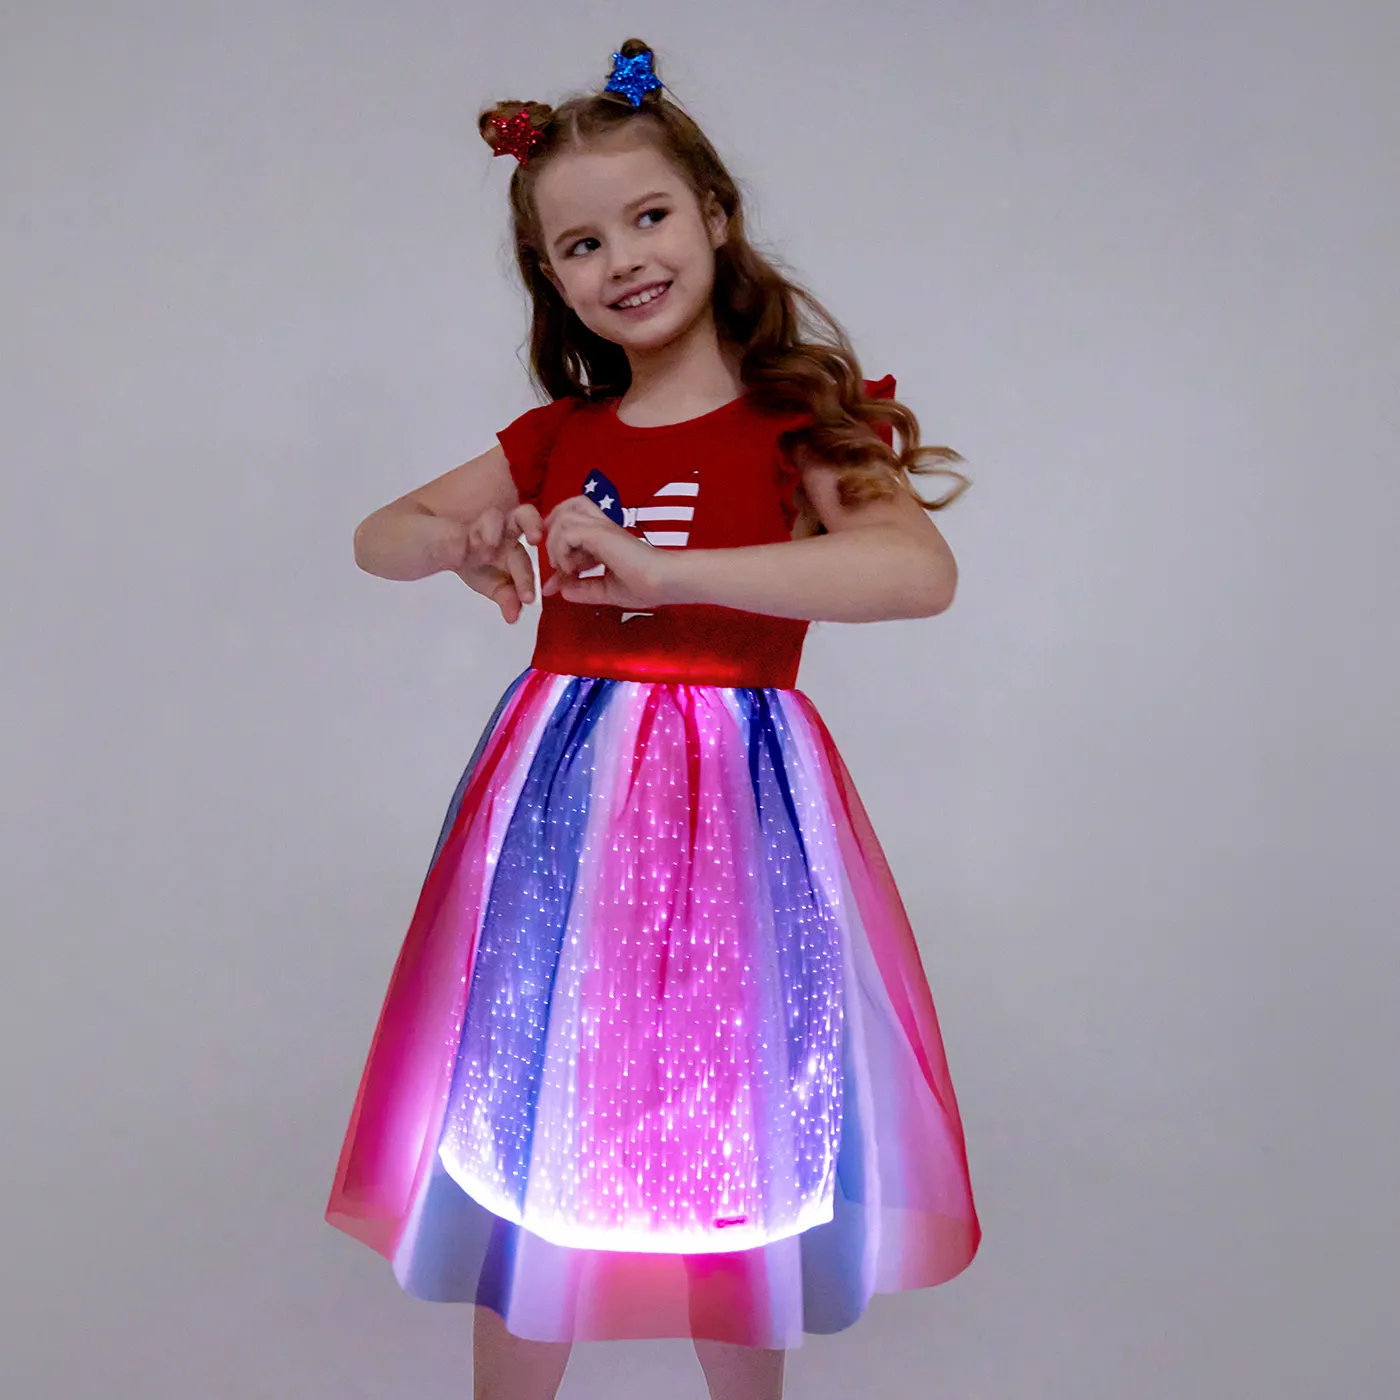 Go-Glow Illuminating Bow-knot Dress With Light Up Skirt Including Controller (Battery Inside)